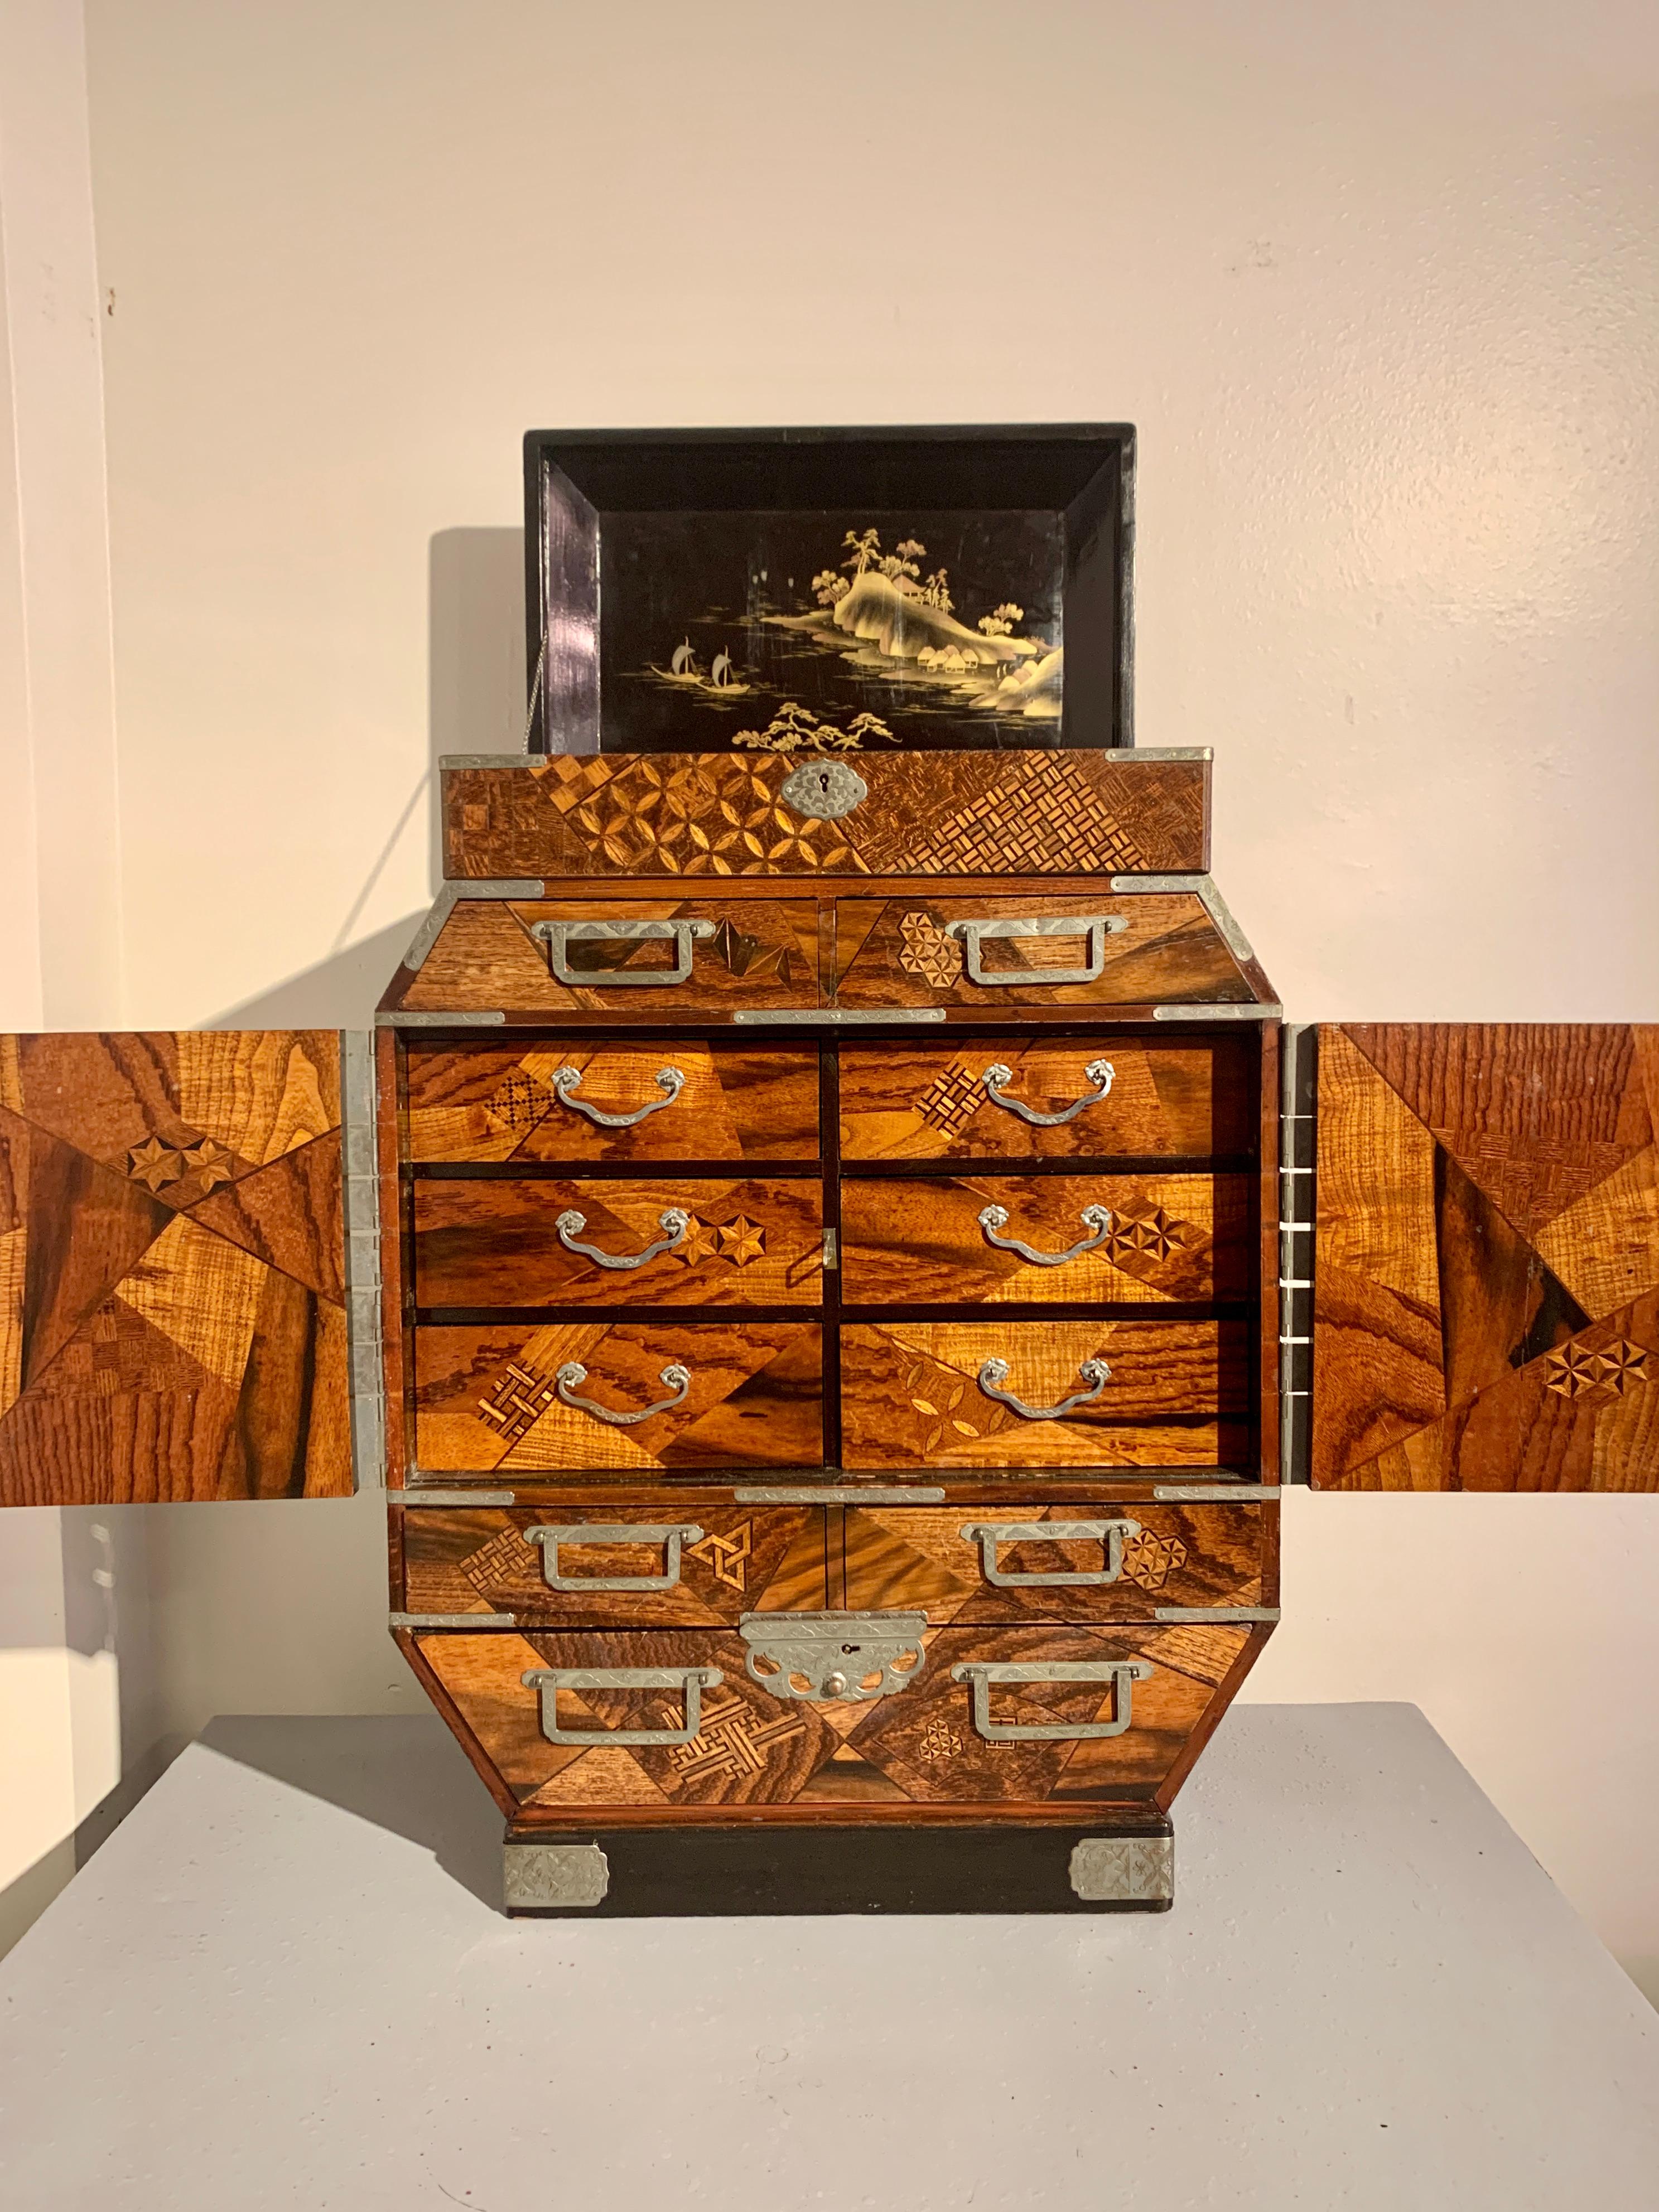 A fine and unusually large Japanese table cabinet or jewelry chest with yosegi marquetry work and lacquer paneled doors, Meiji period, late 19th century, Japan. 

The oversized table cabinet of irregular octagon shape, with a lift top featuring a